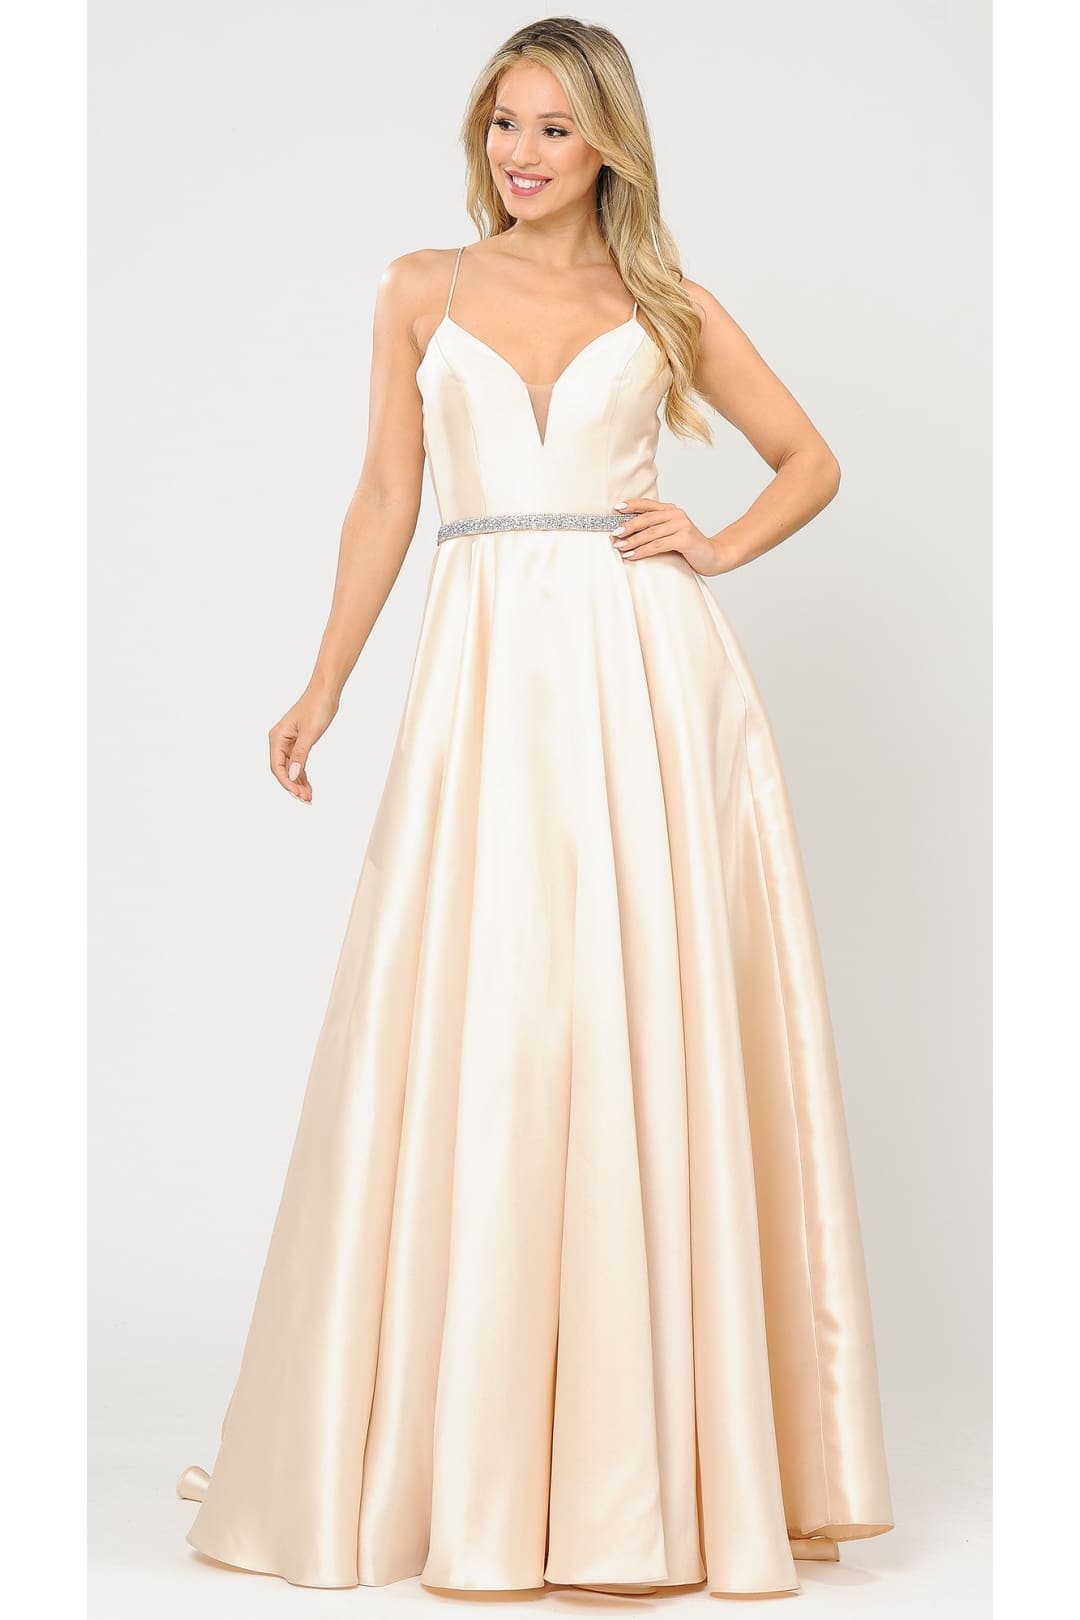 Special Occasion Classy Formal Gown - CHAMPAGNE / XS